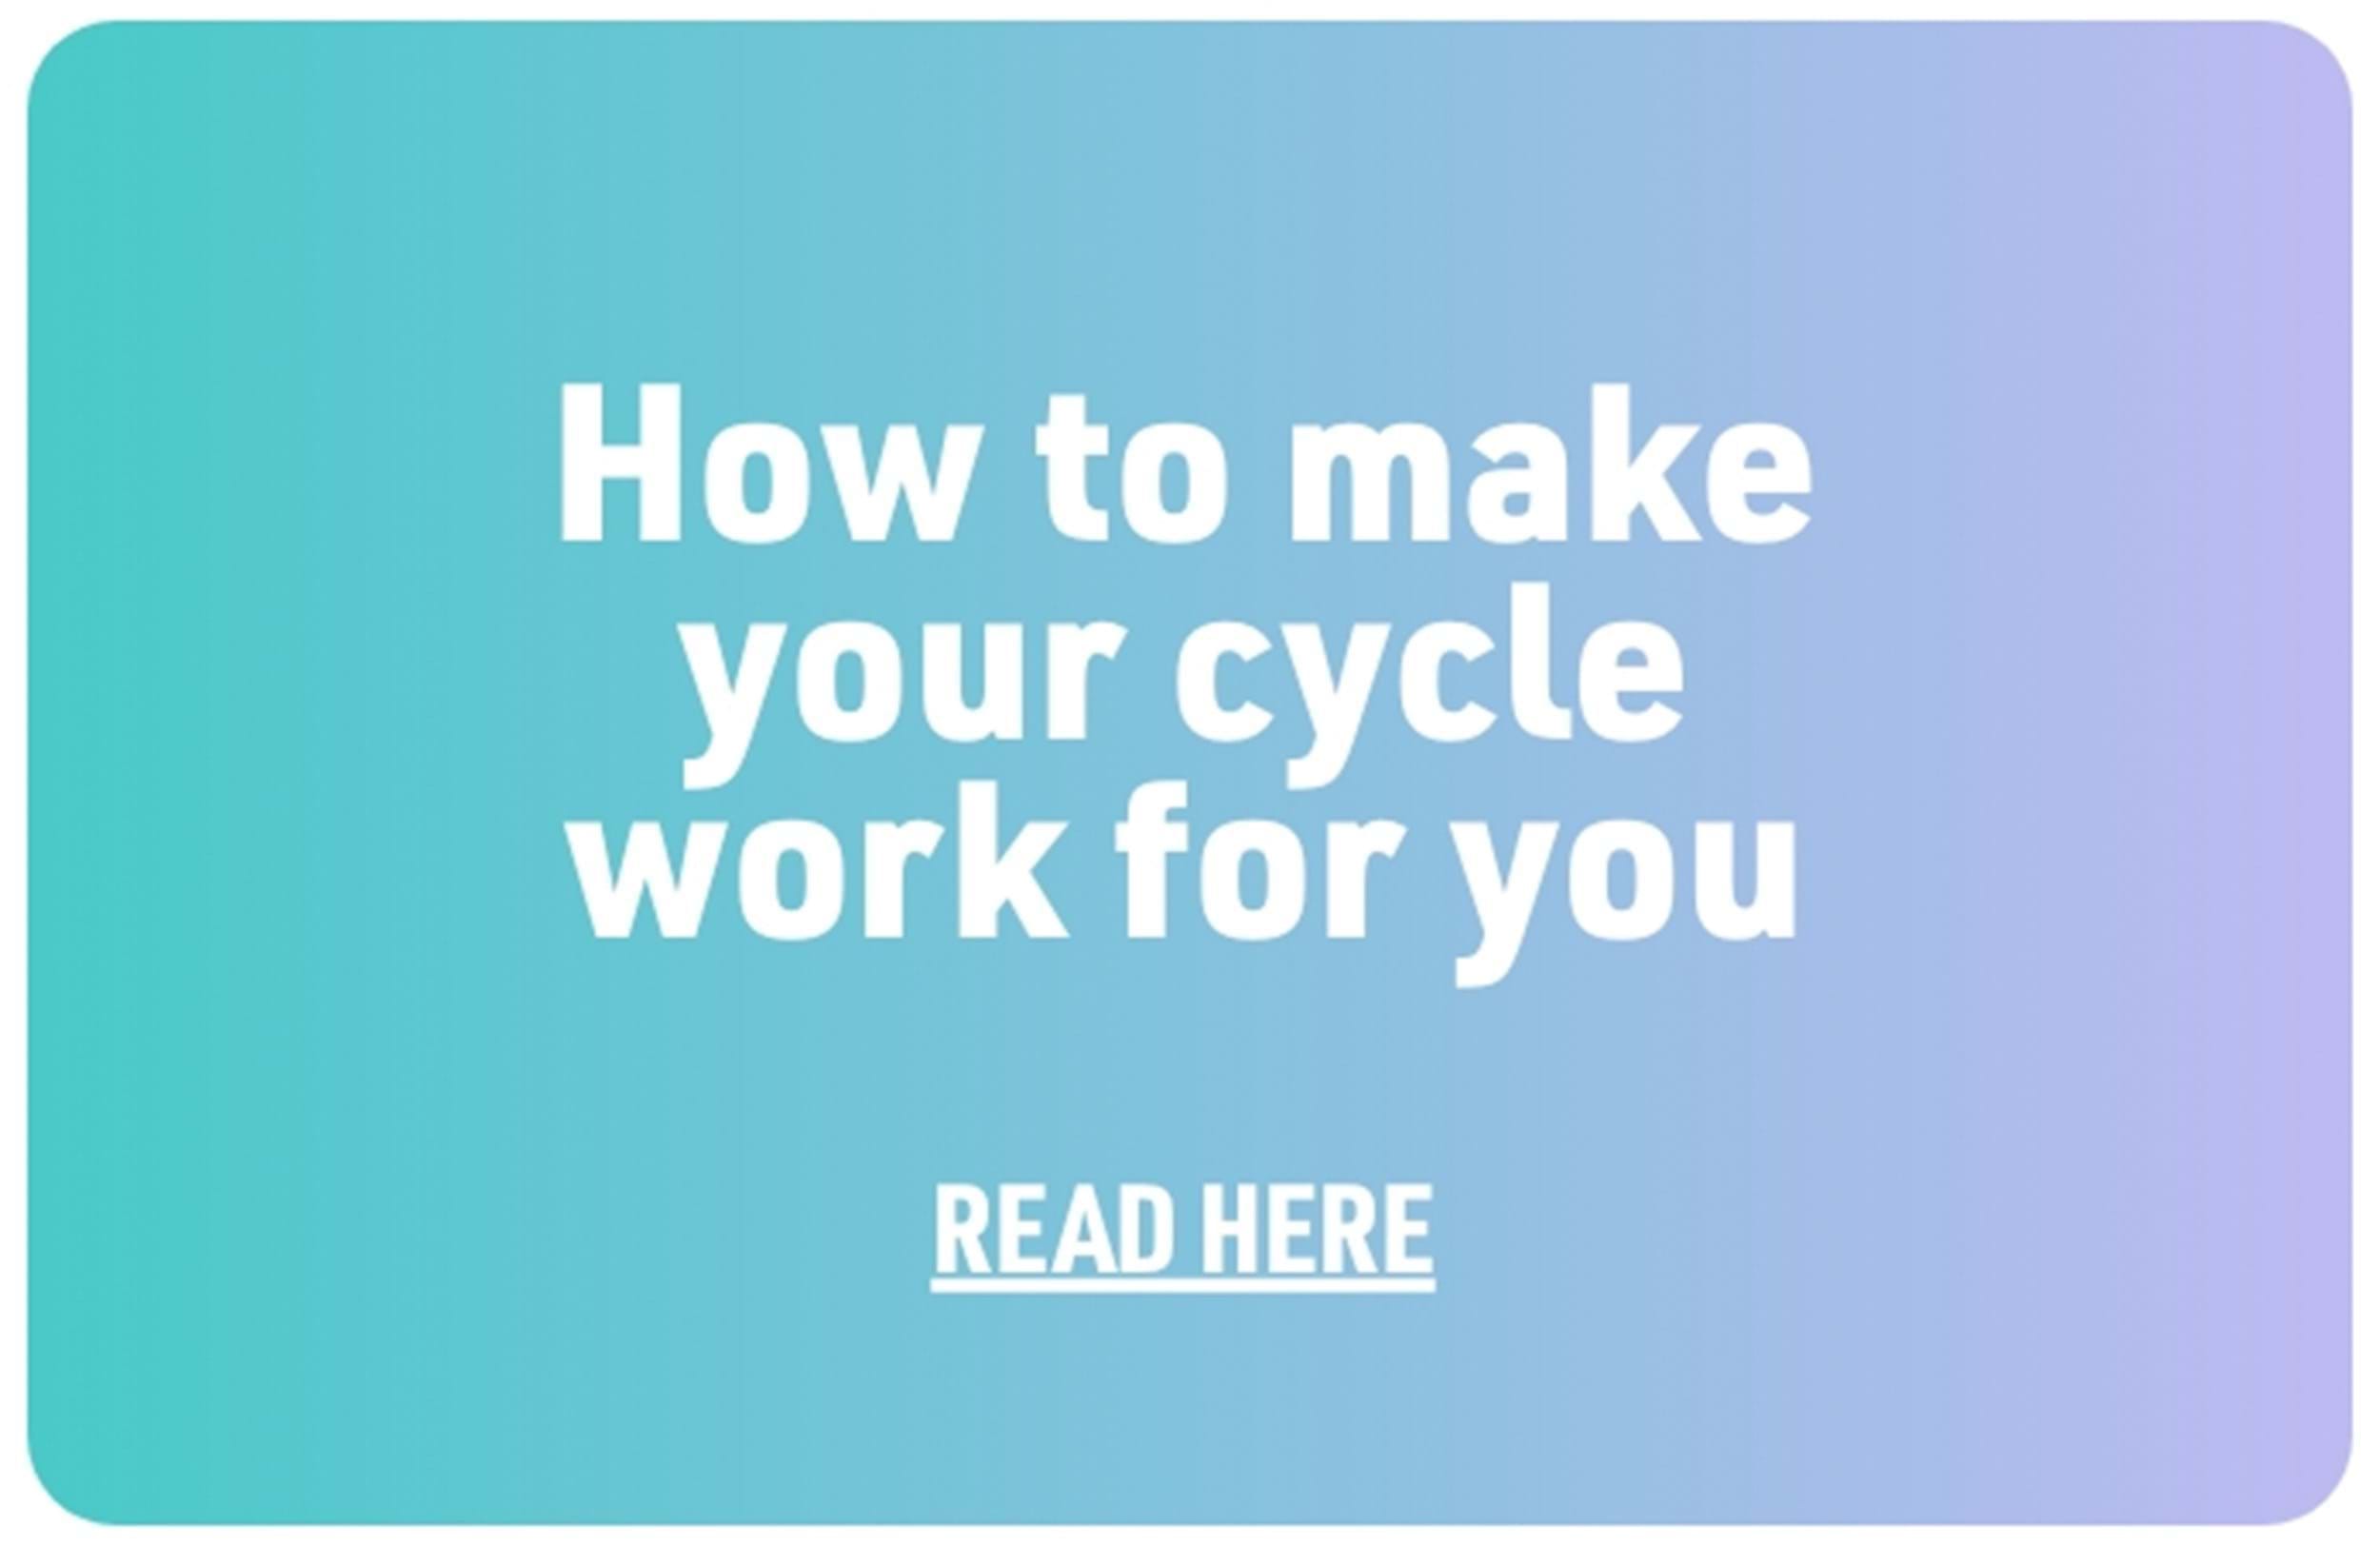 How to make your cycle work for you